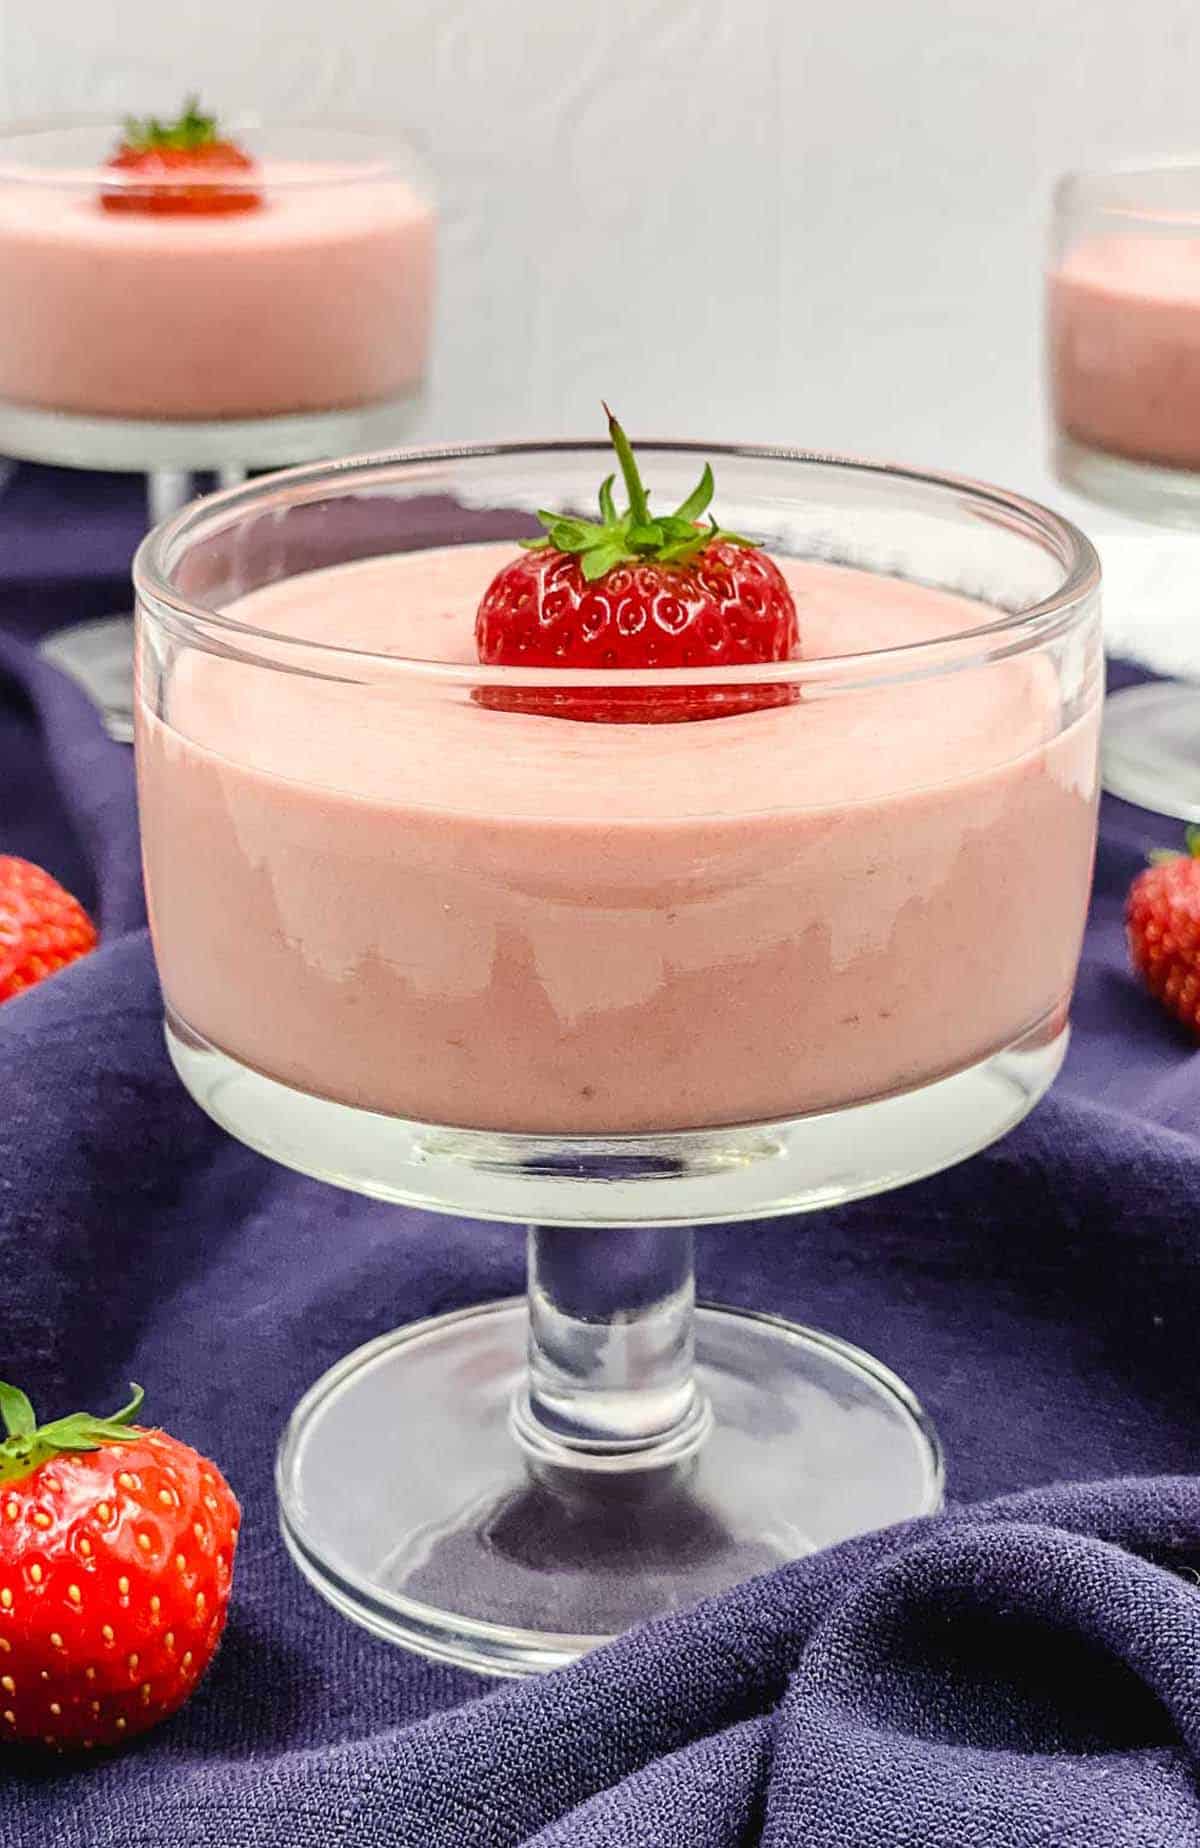 Homemade strawberry mousse in serving dishes.